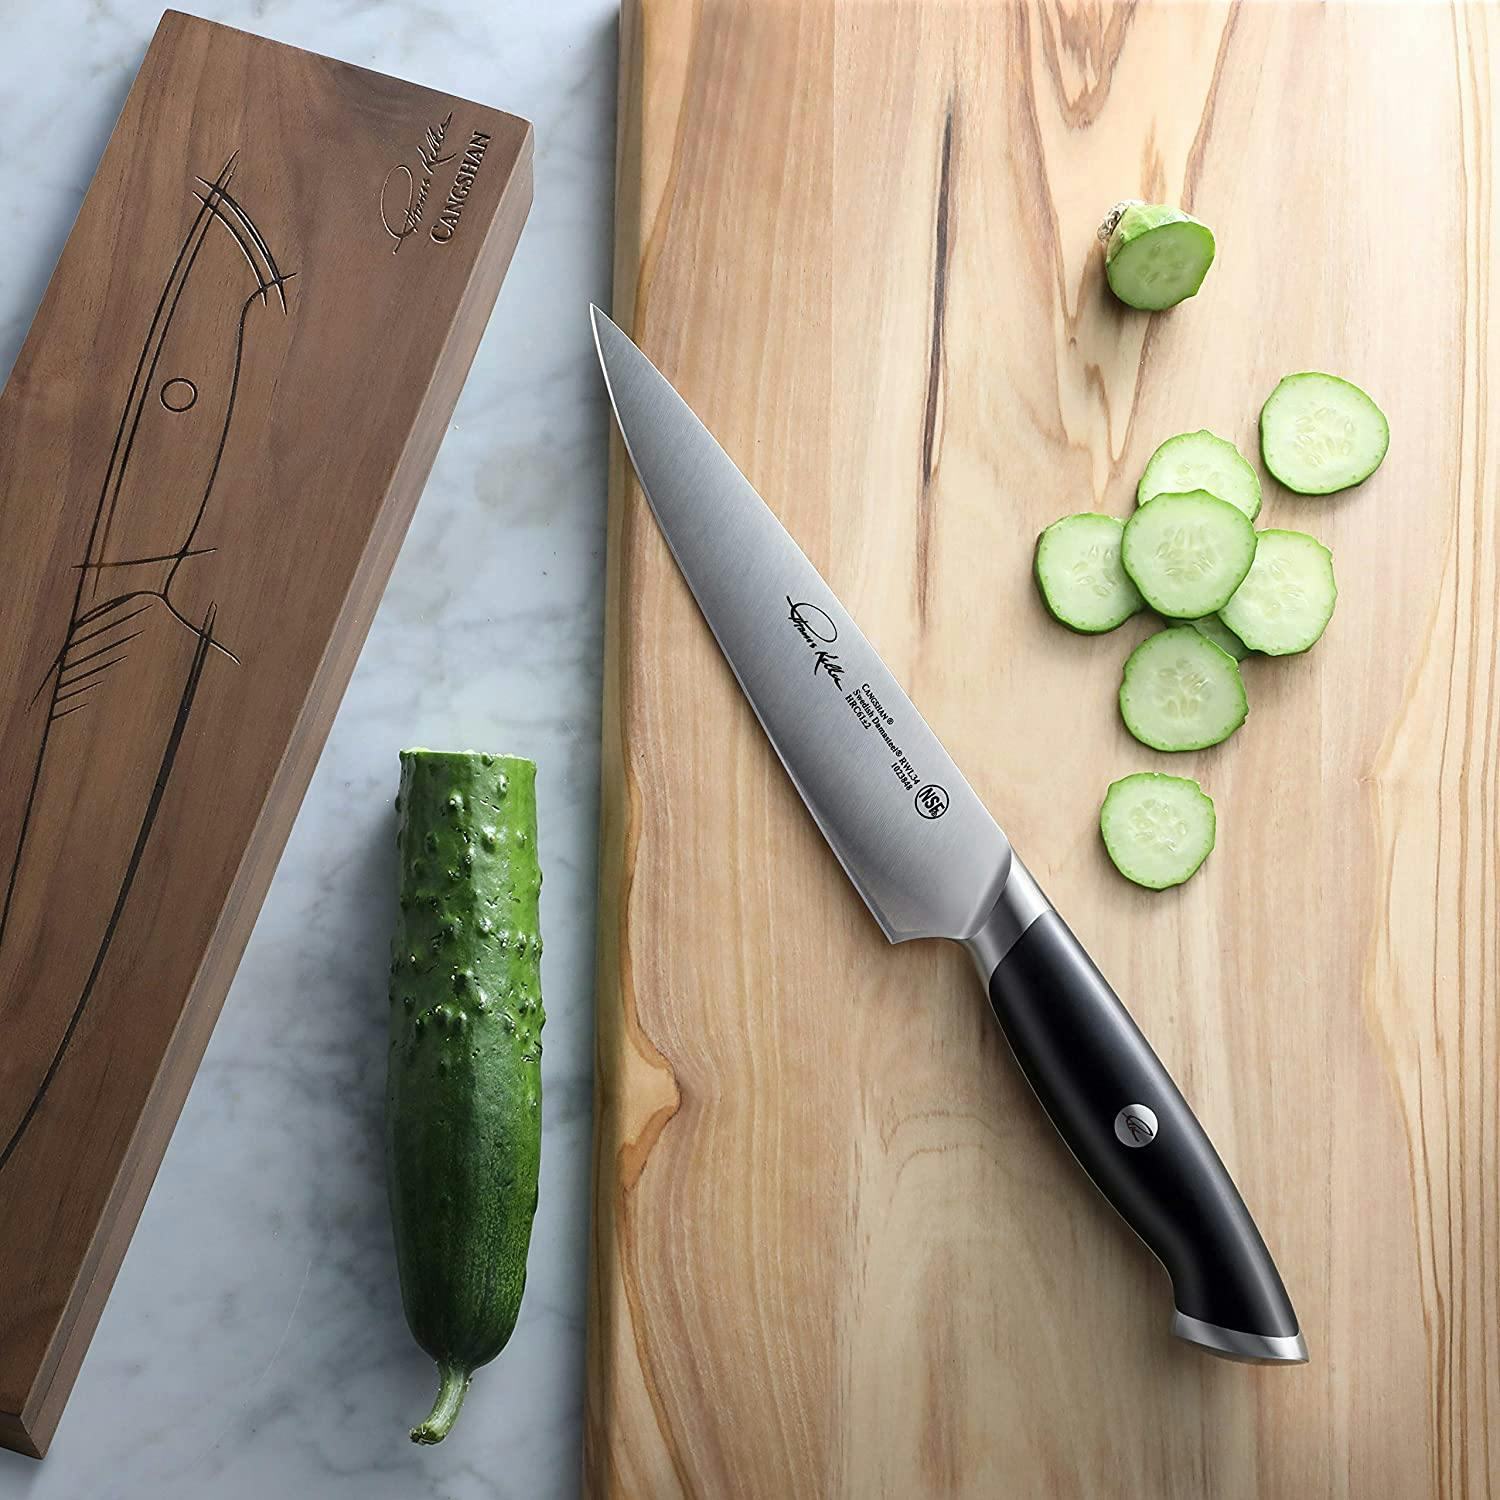 Cangshan Thomas Keller Signature Collection Utility Knife, 5"